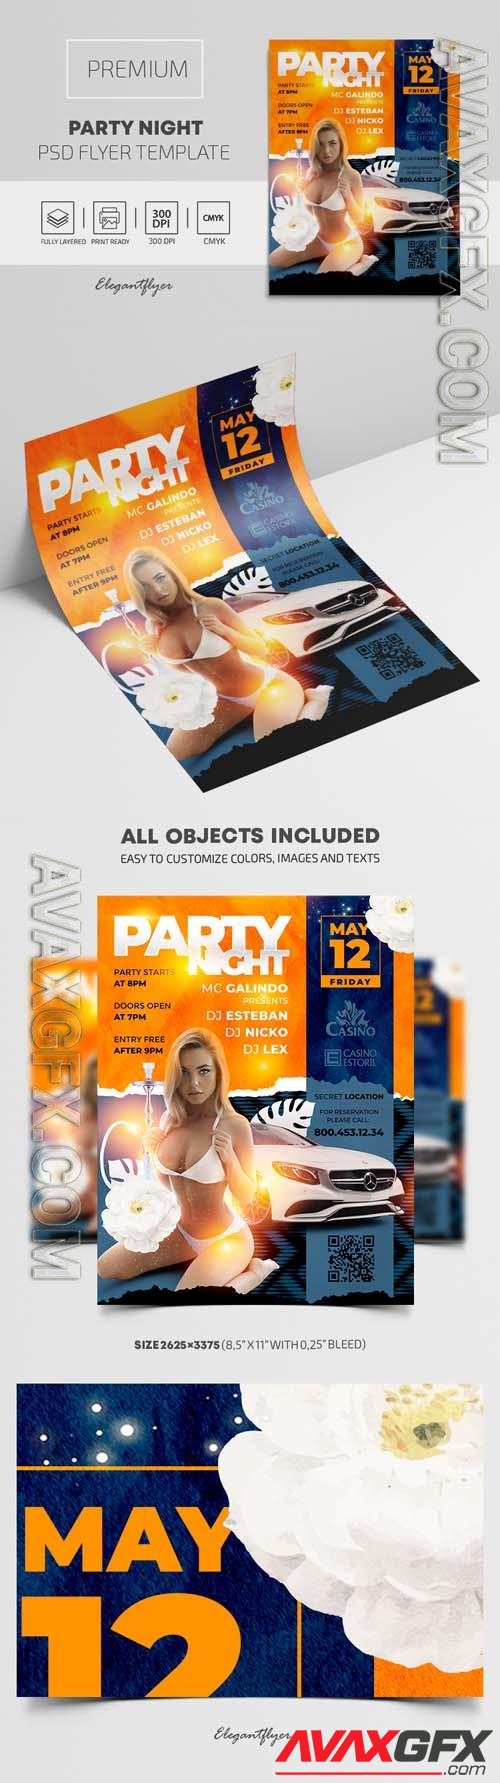 Party Night Premium PSD Flyer Template